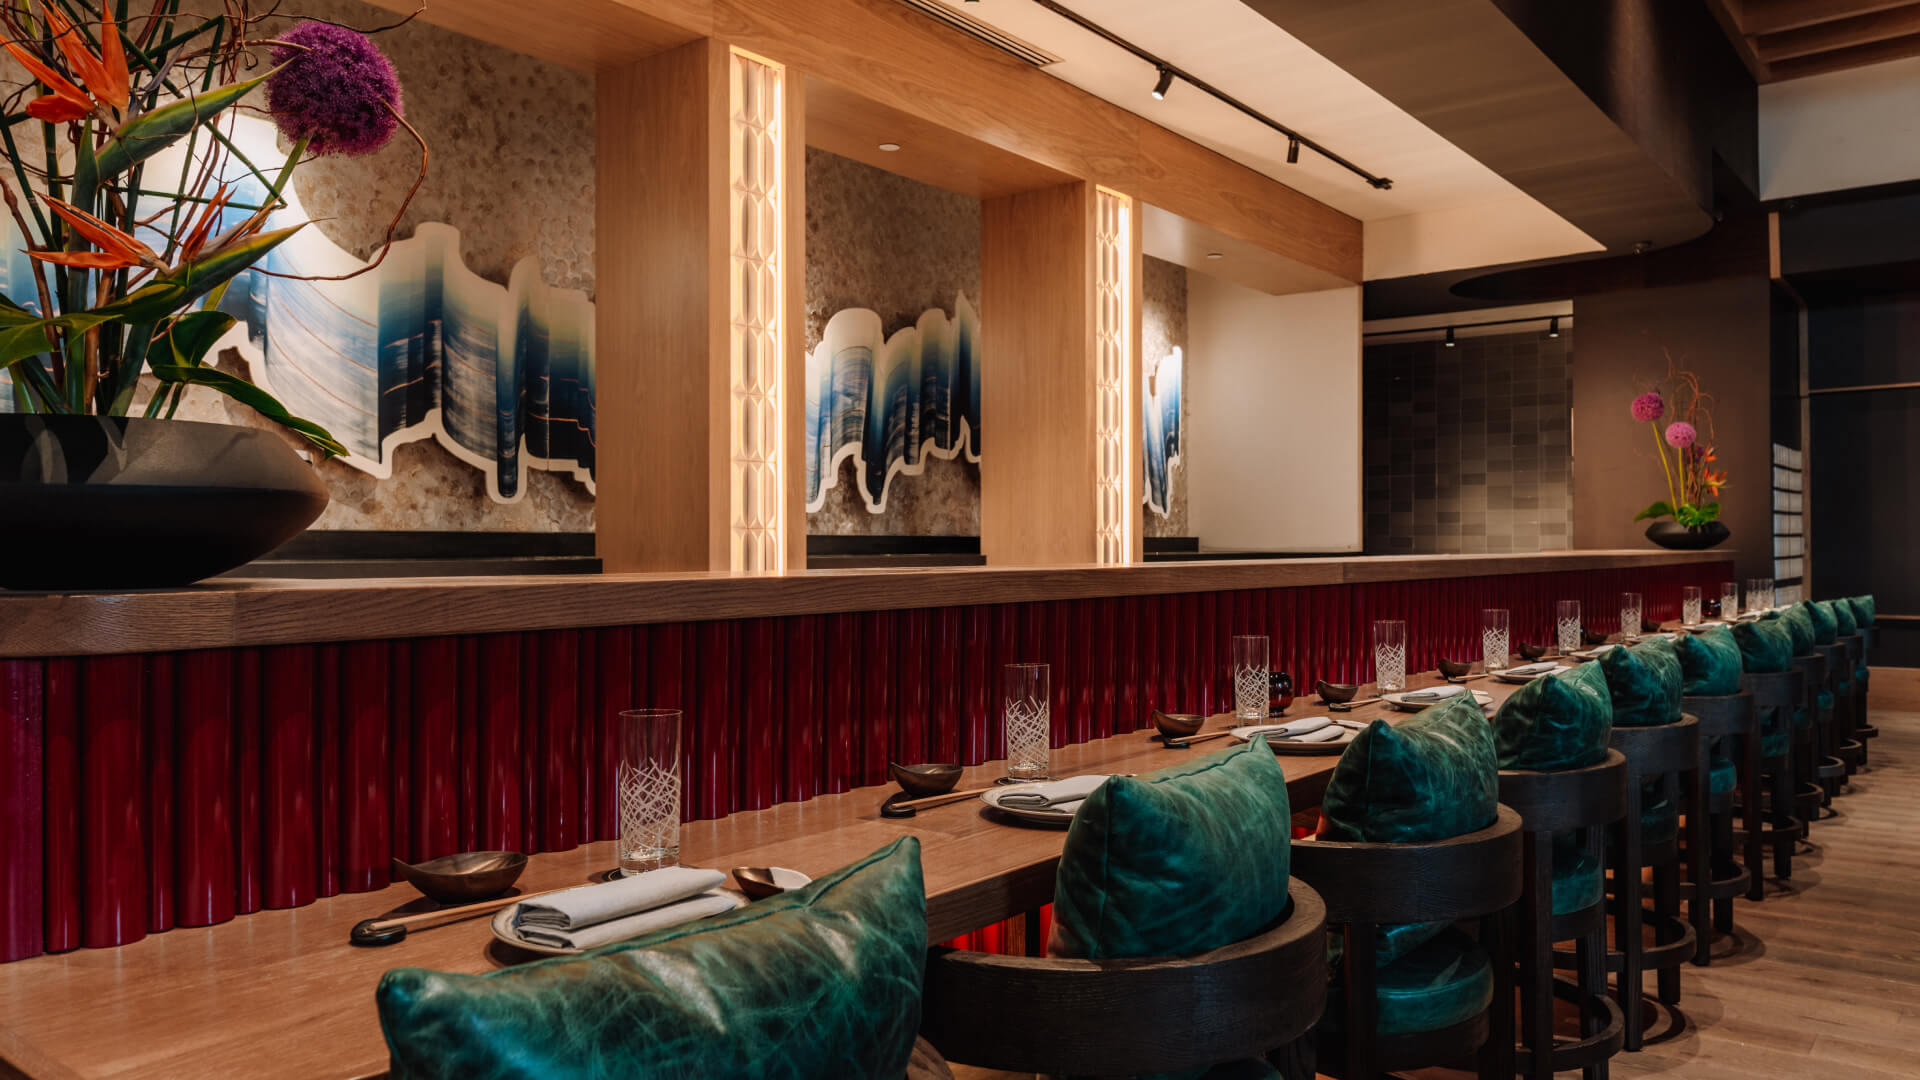 A modern restaurant interior featuring a wooden dining counter with teal-cushioned chairs, decorative plants, and abstract wall art, with soft lighting creating a warm ambiance.